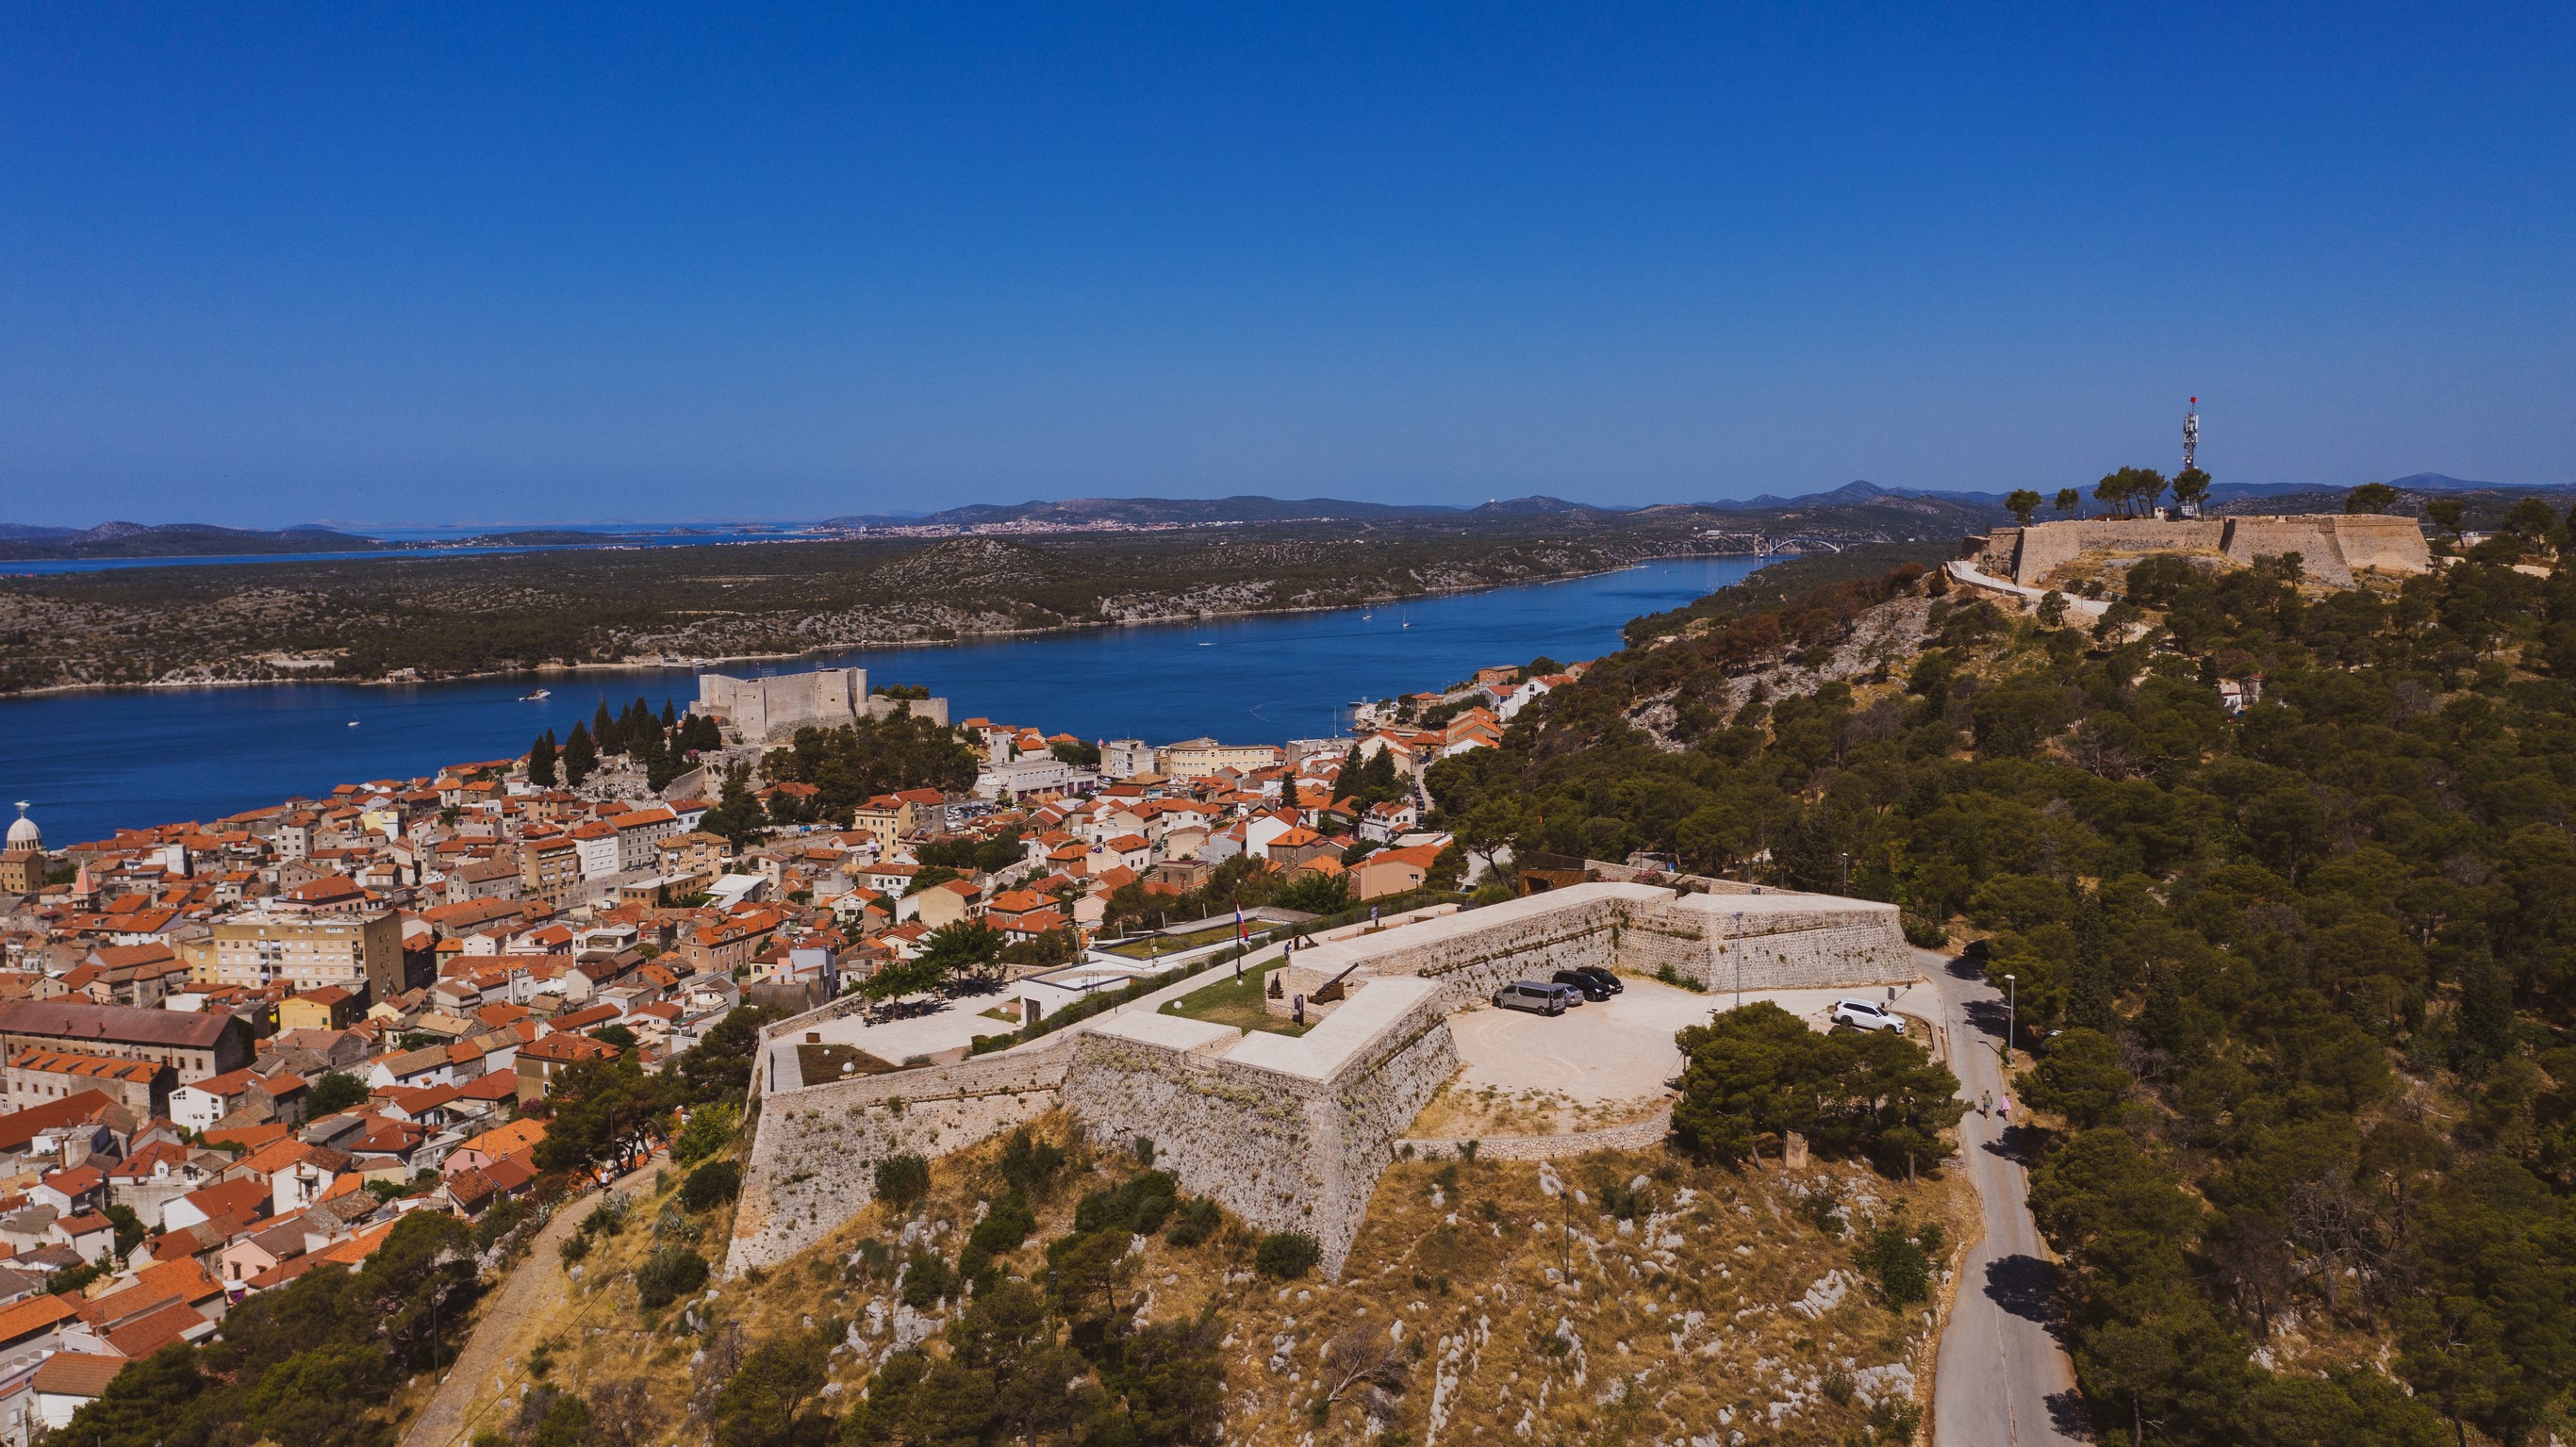 13 reasons why the combined ticket for the Šibenik fortresses is the best choice